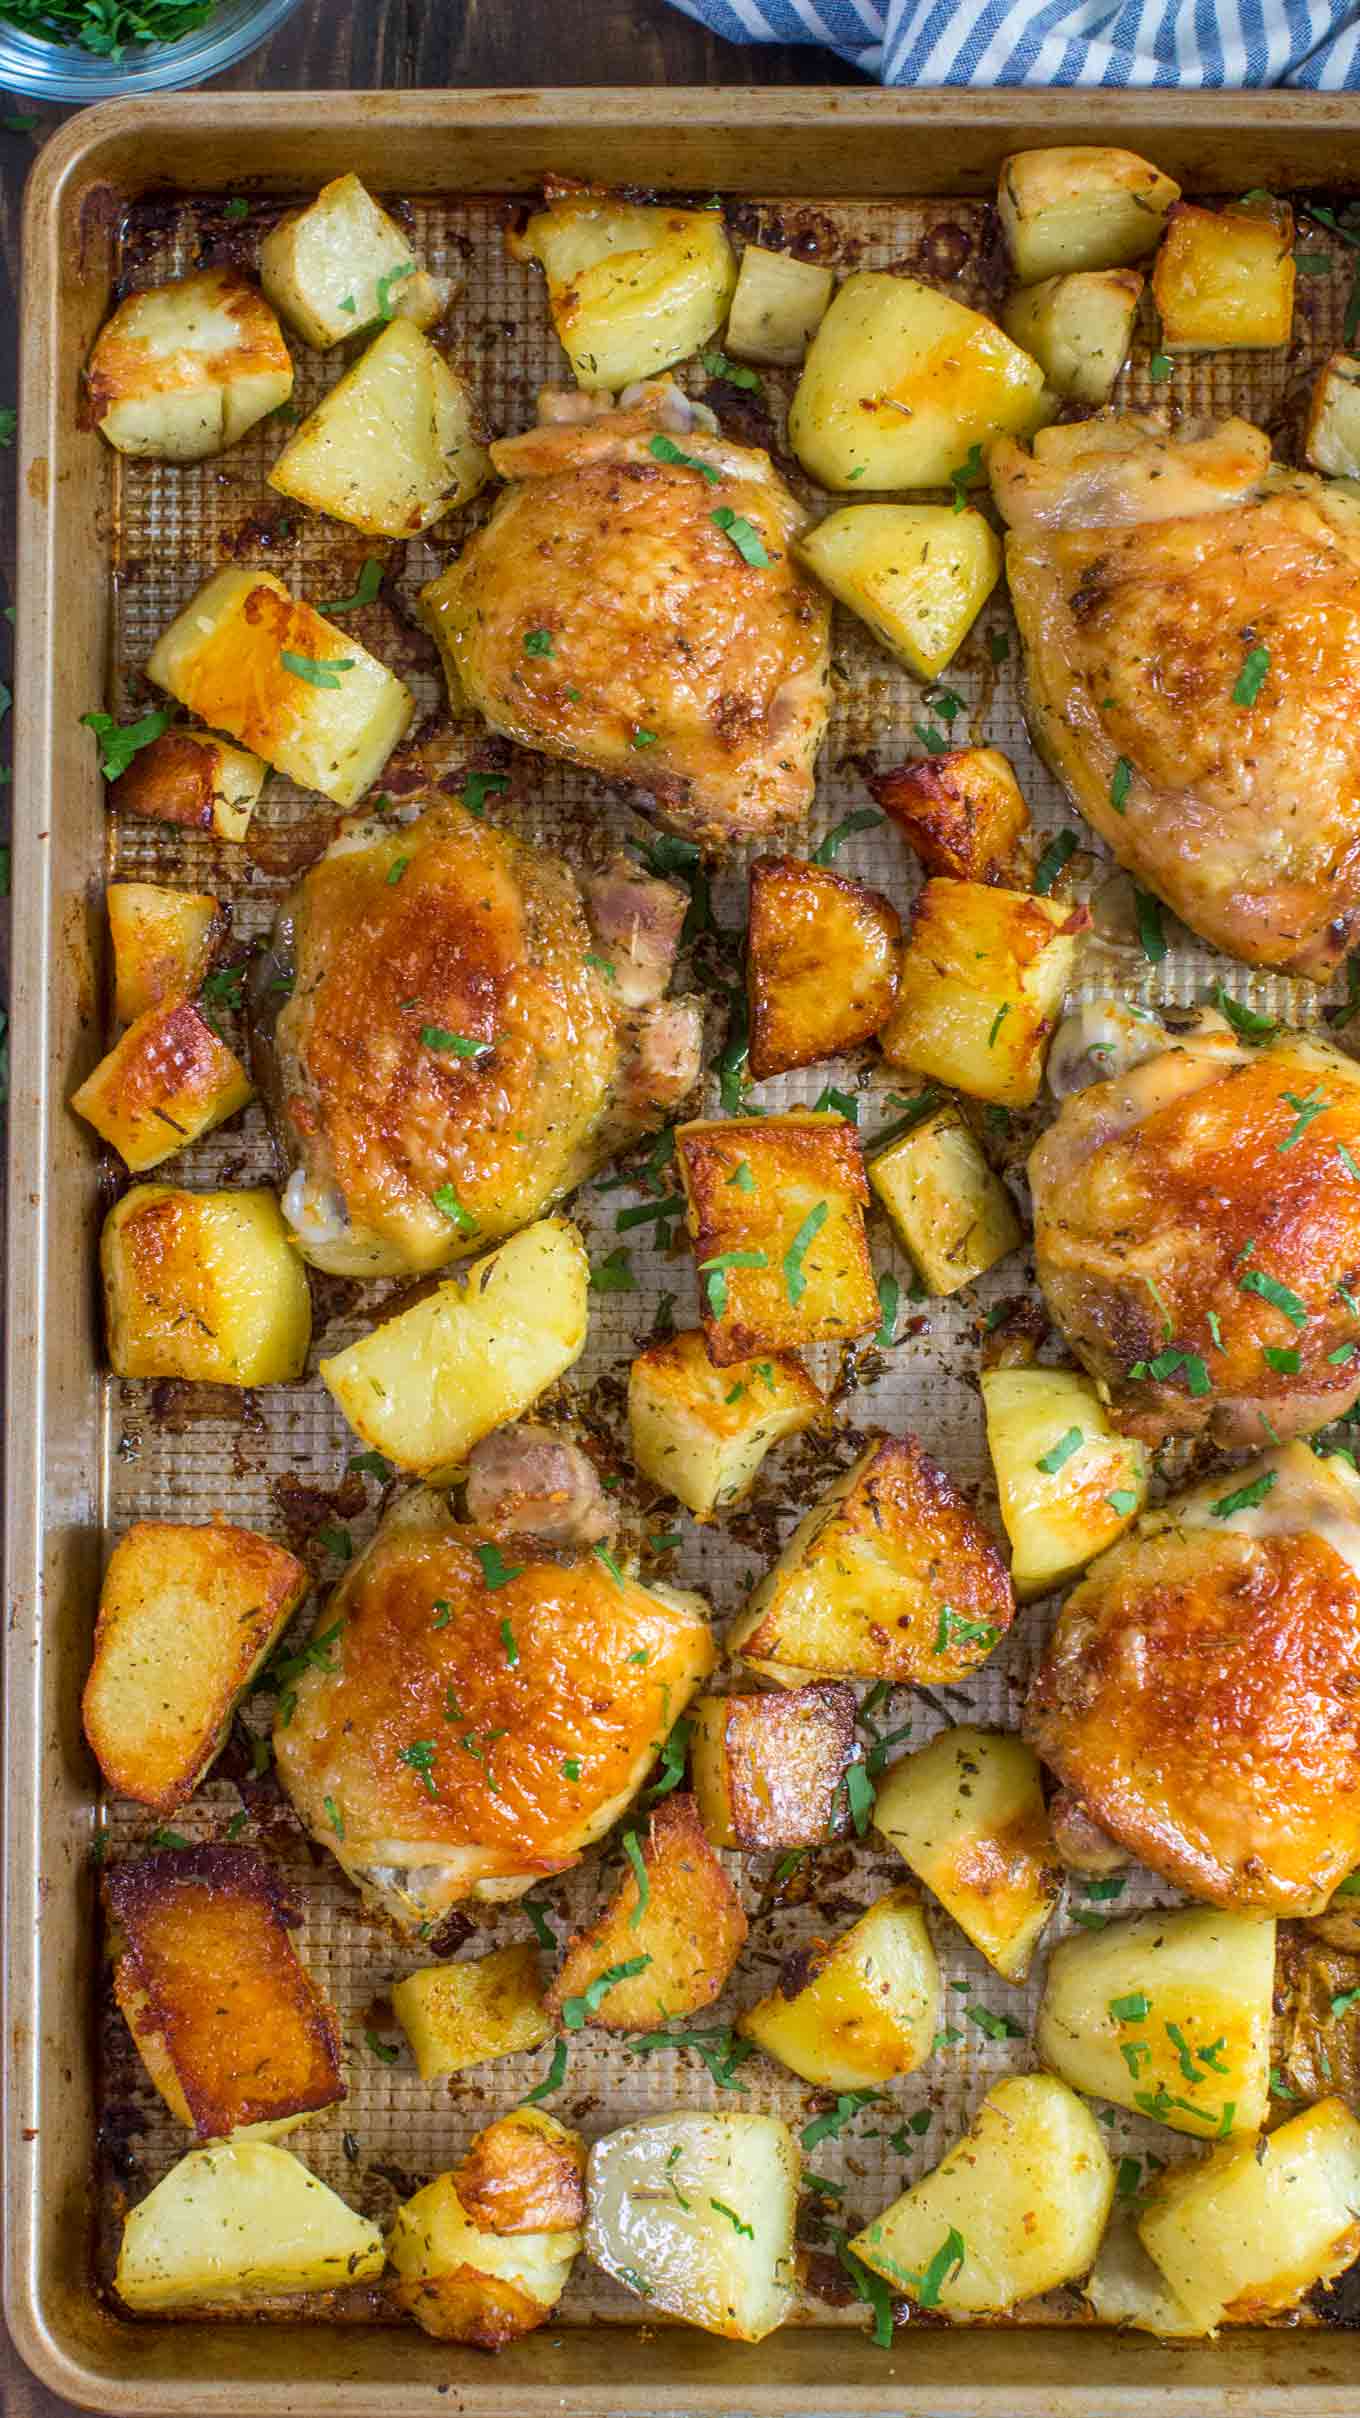 Chicken and Potatoes Recipe - 5 Ingredients Only! - S&SM